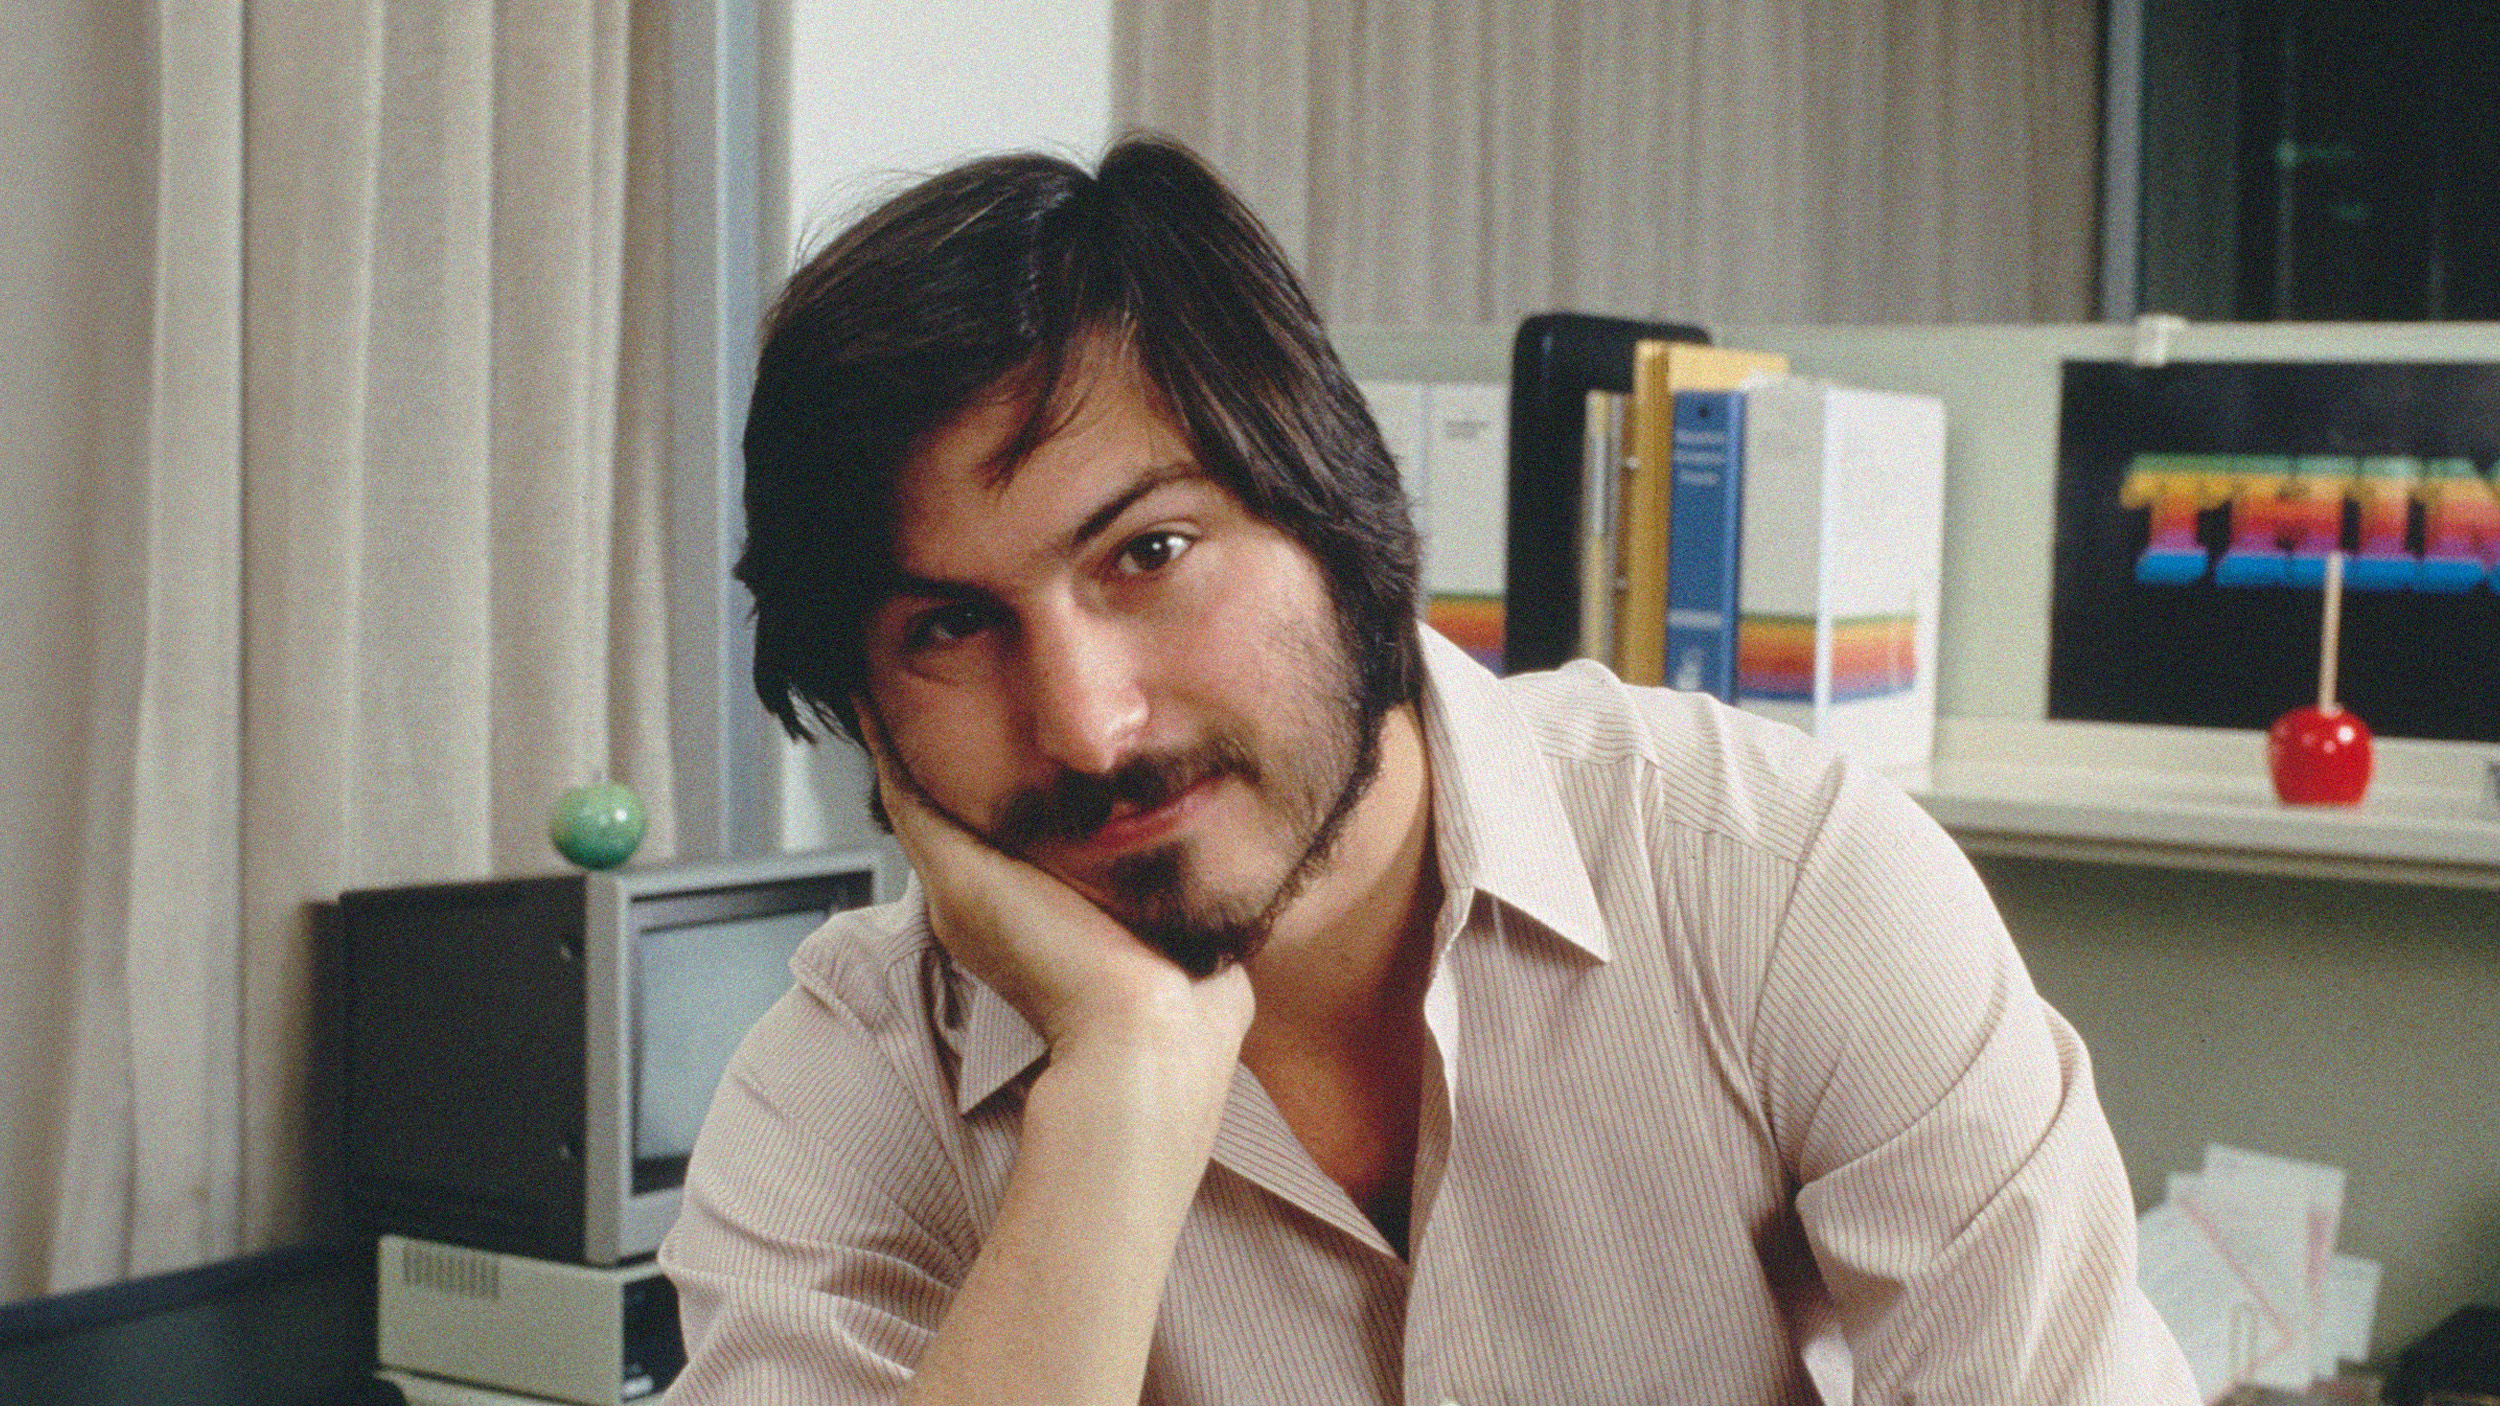 Steve Jobs in his office, showcasing survivorship bias in his journey of founding and leading Apple.